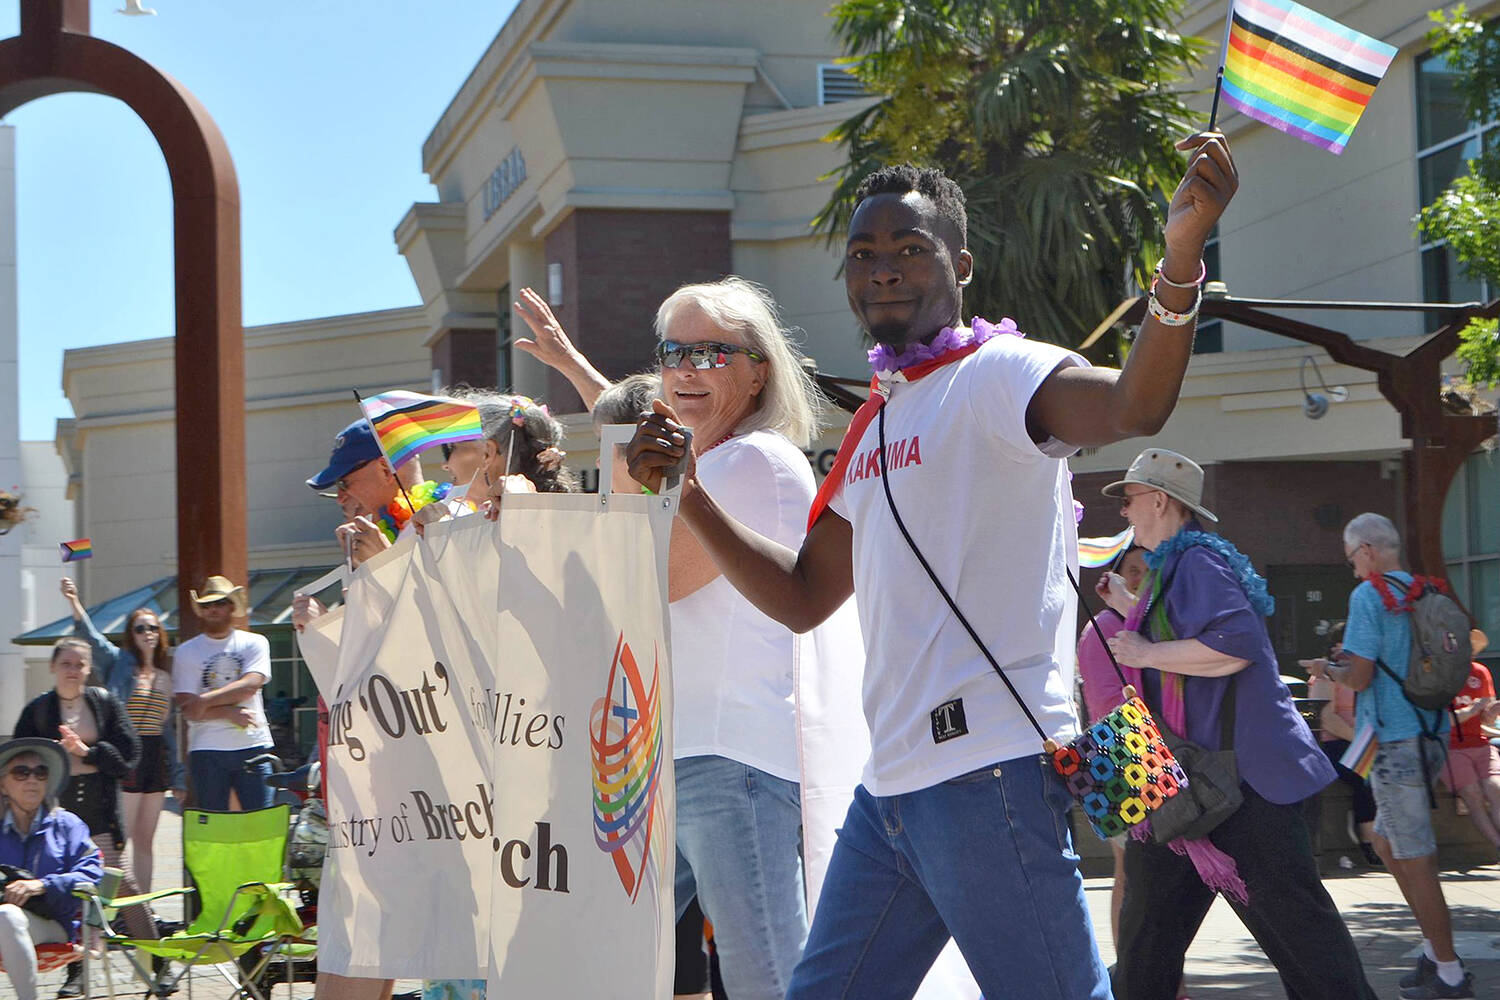 Paul Canary Kanyamu marches with Reaching ‘Out’ for LGBTQ and Allies of Brechin United Church, during Nanaimo’s Pride Parade on June 11. (Mandy Moraes/News Bulletin)